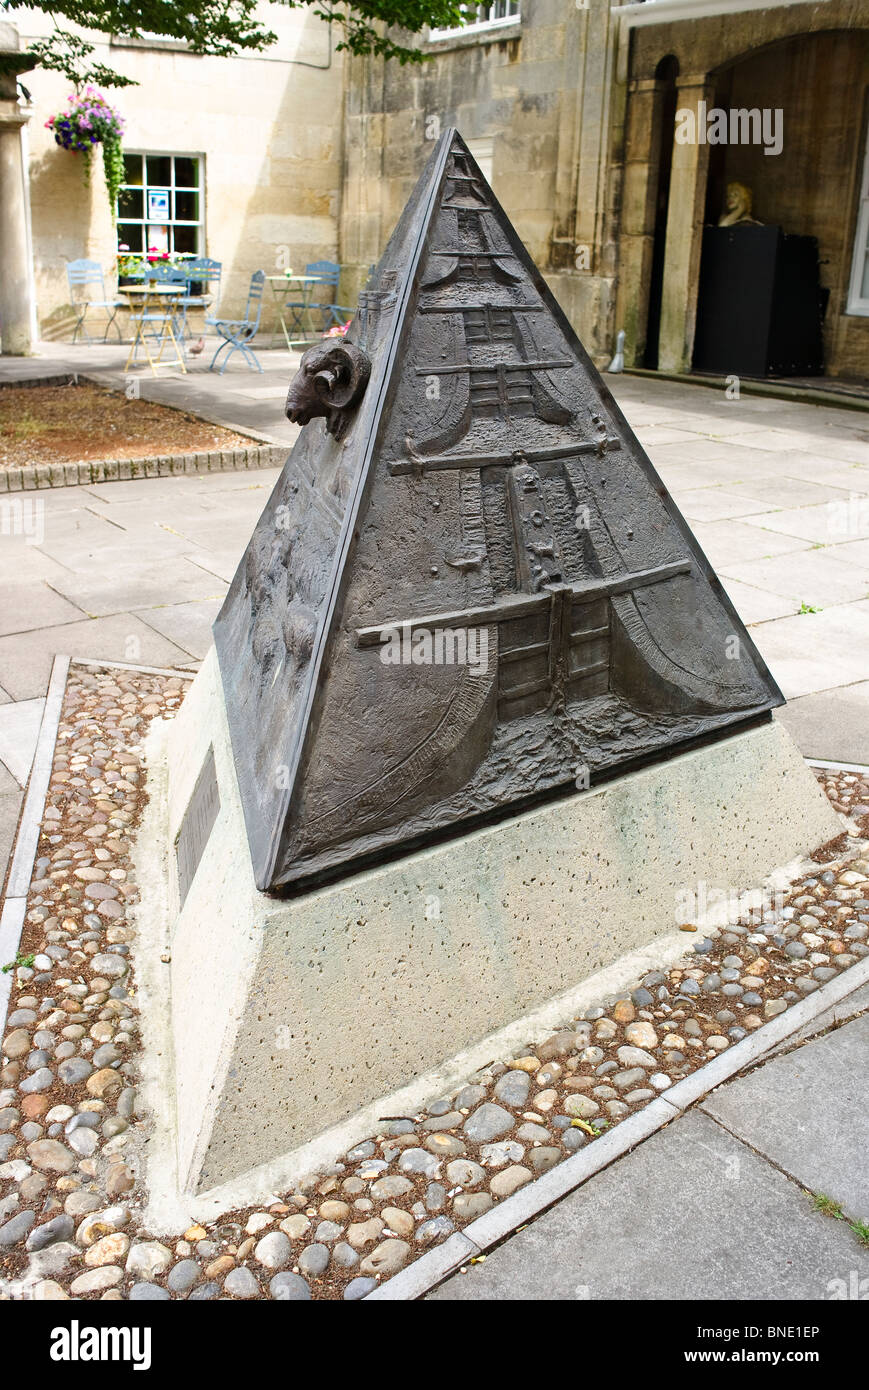 The Devizes Pyramid statue sculpted by Richard Cowdy Stock Photo